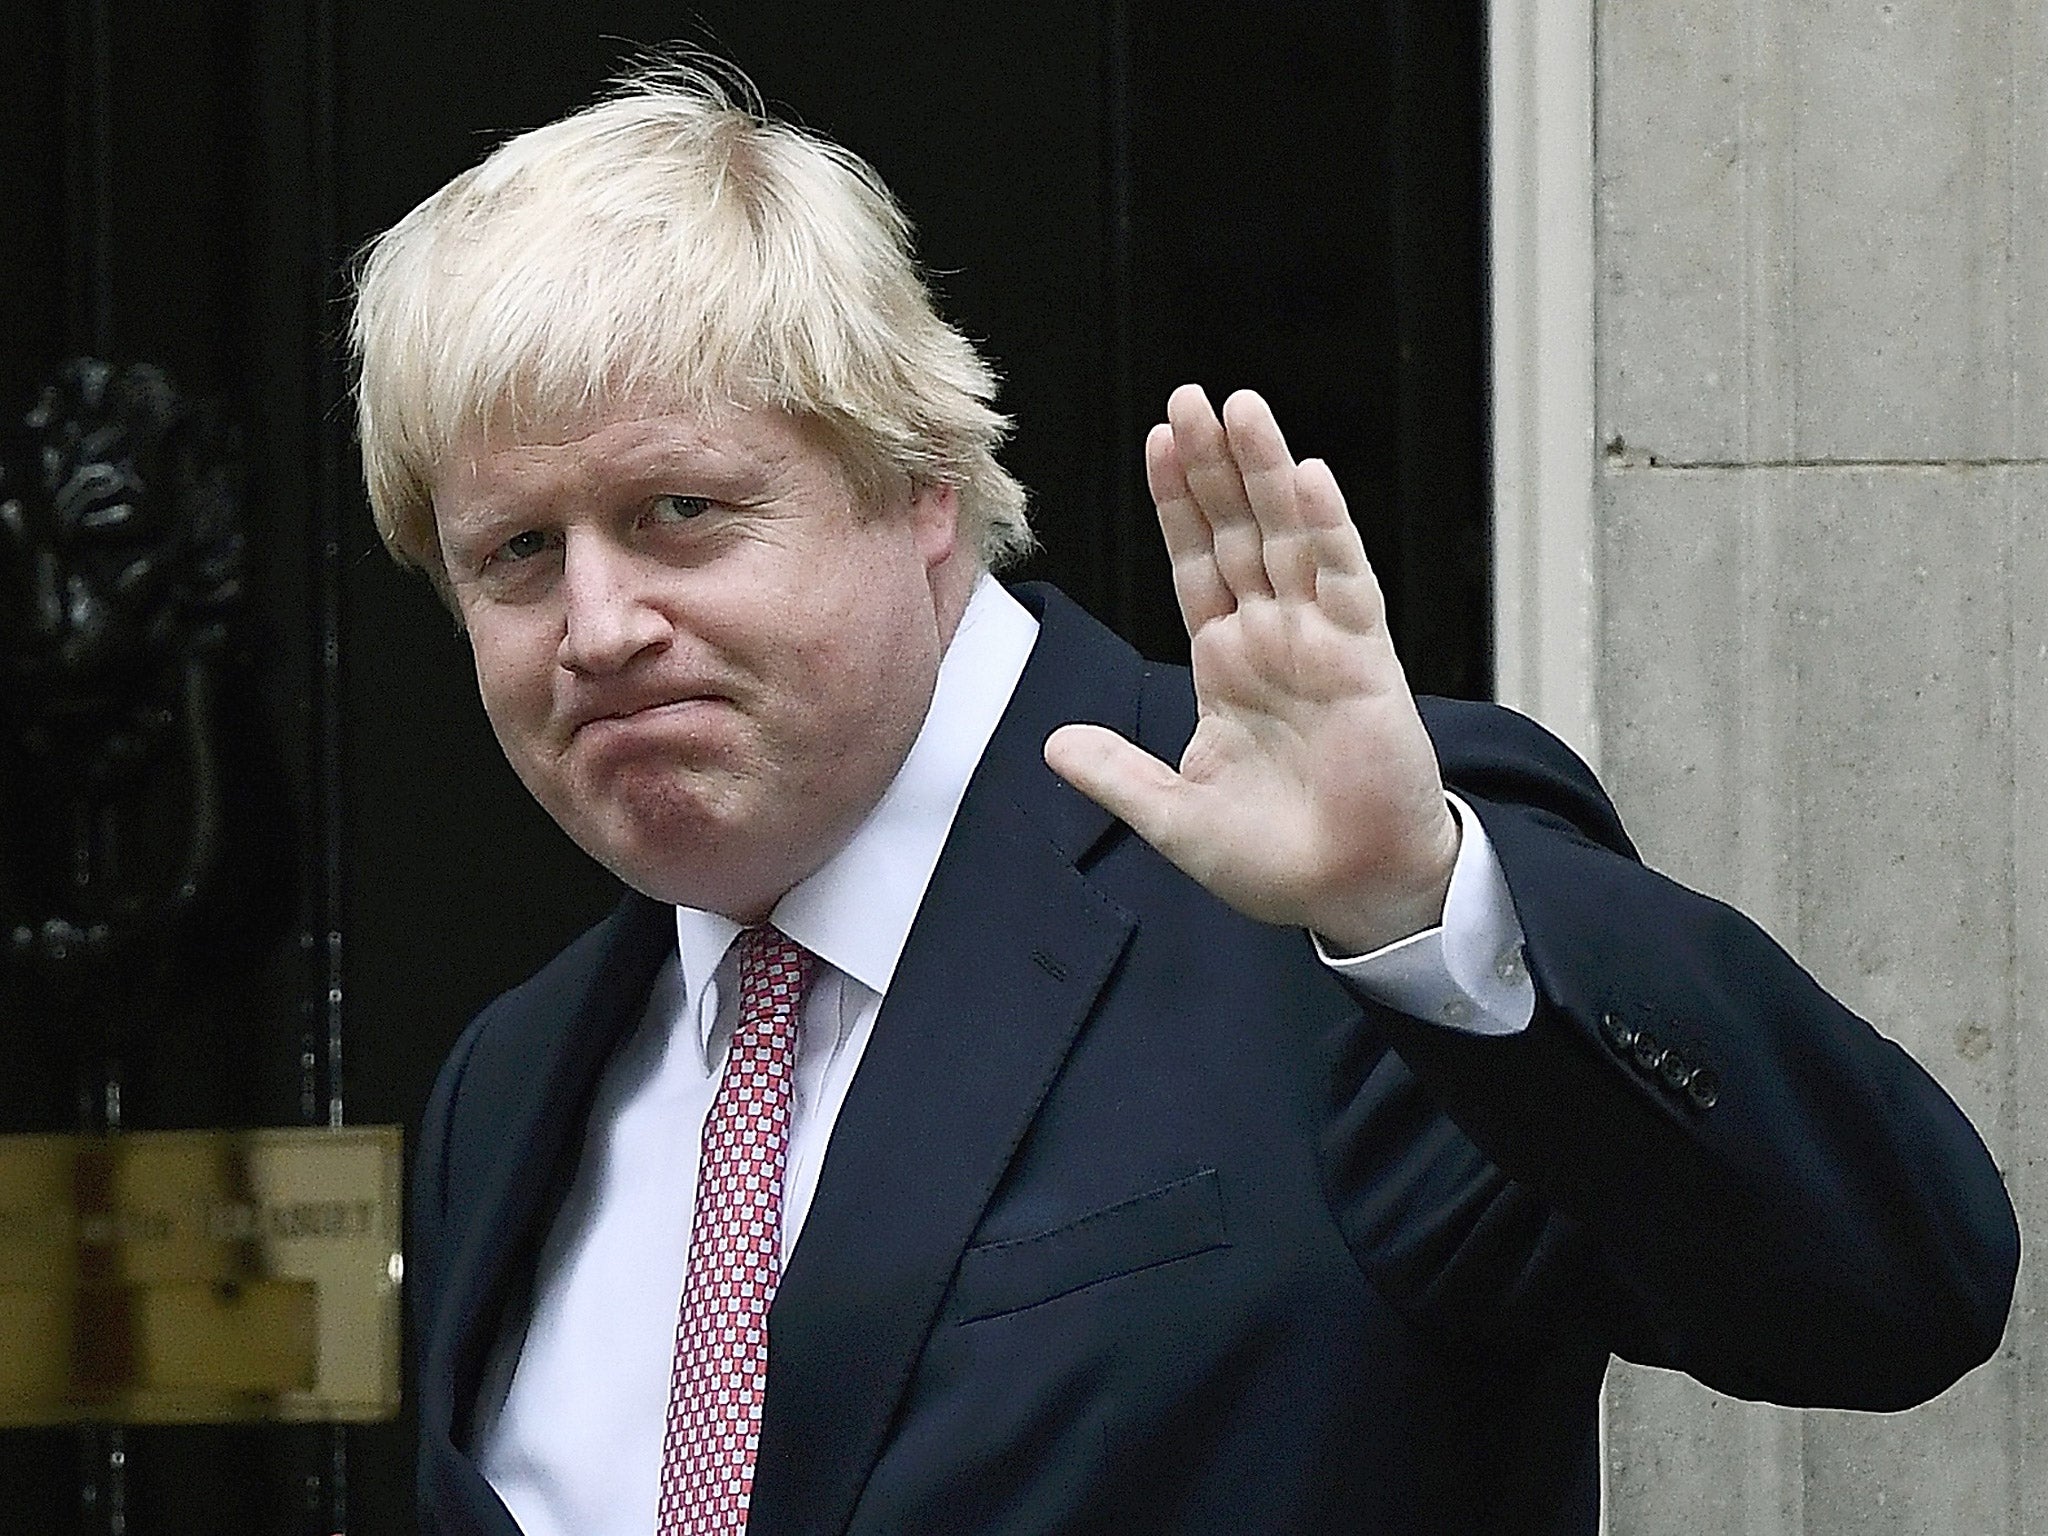 The Foreign Secretary said London would become 'the city of planes' and not in a good way